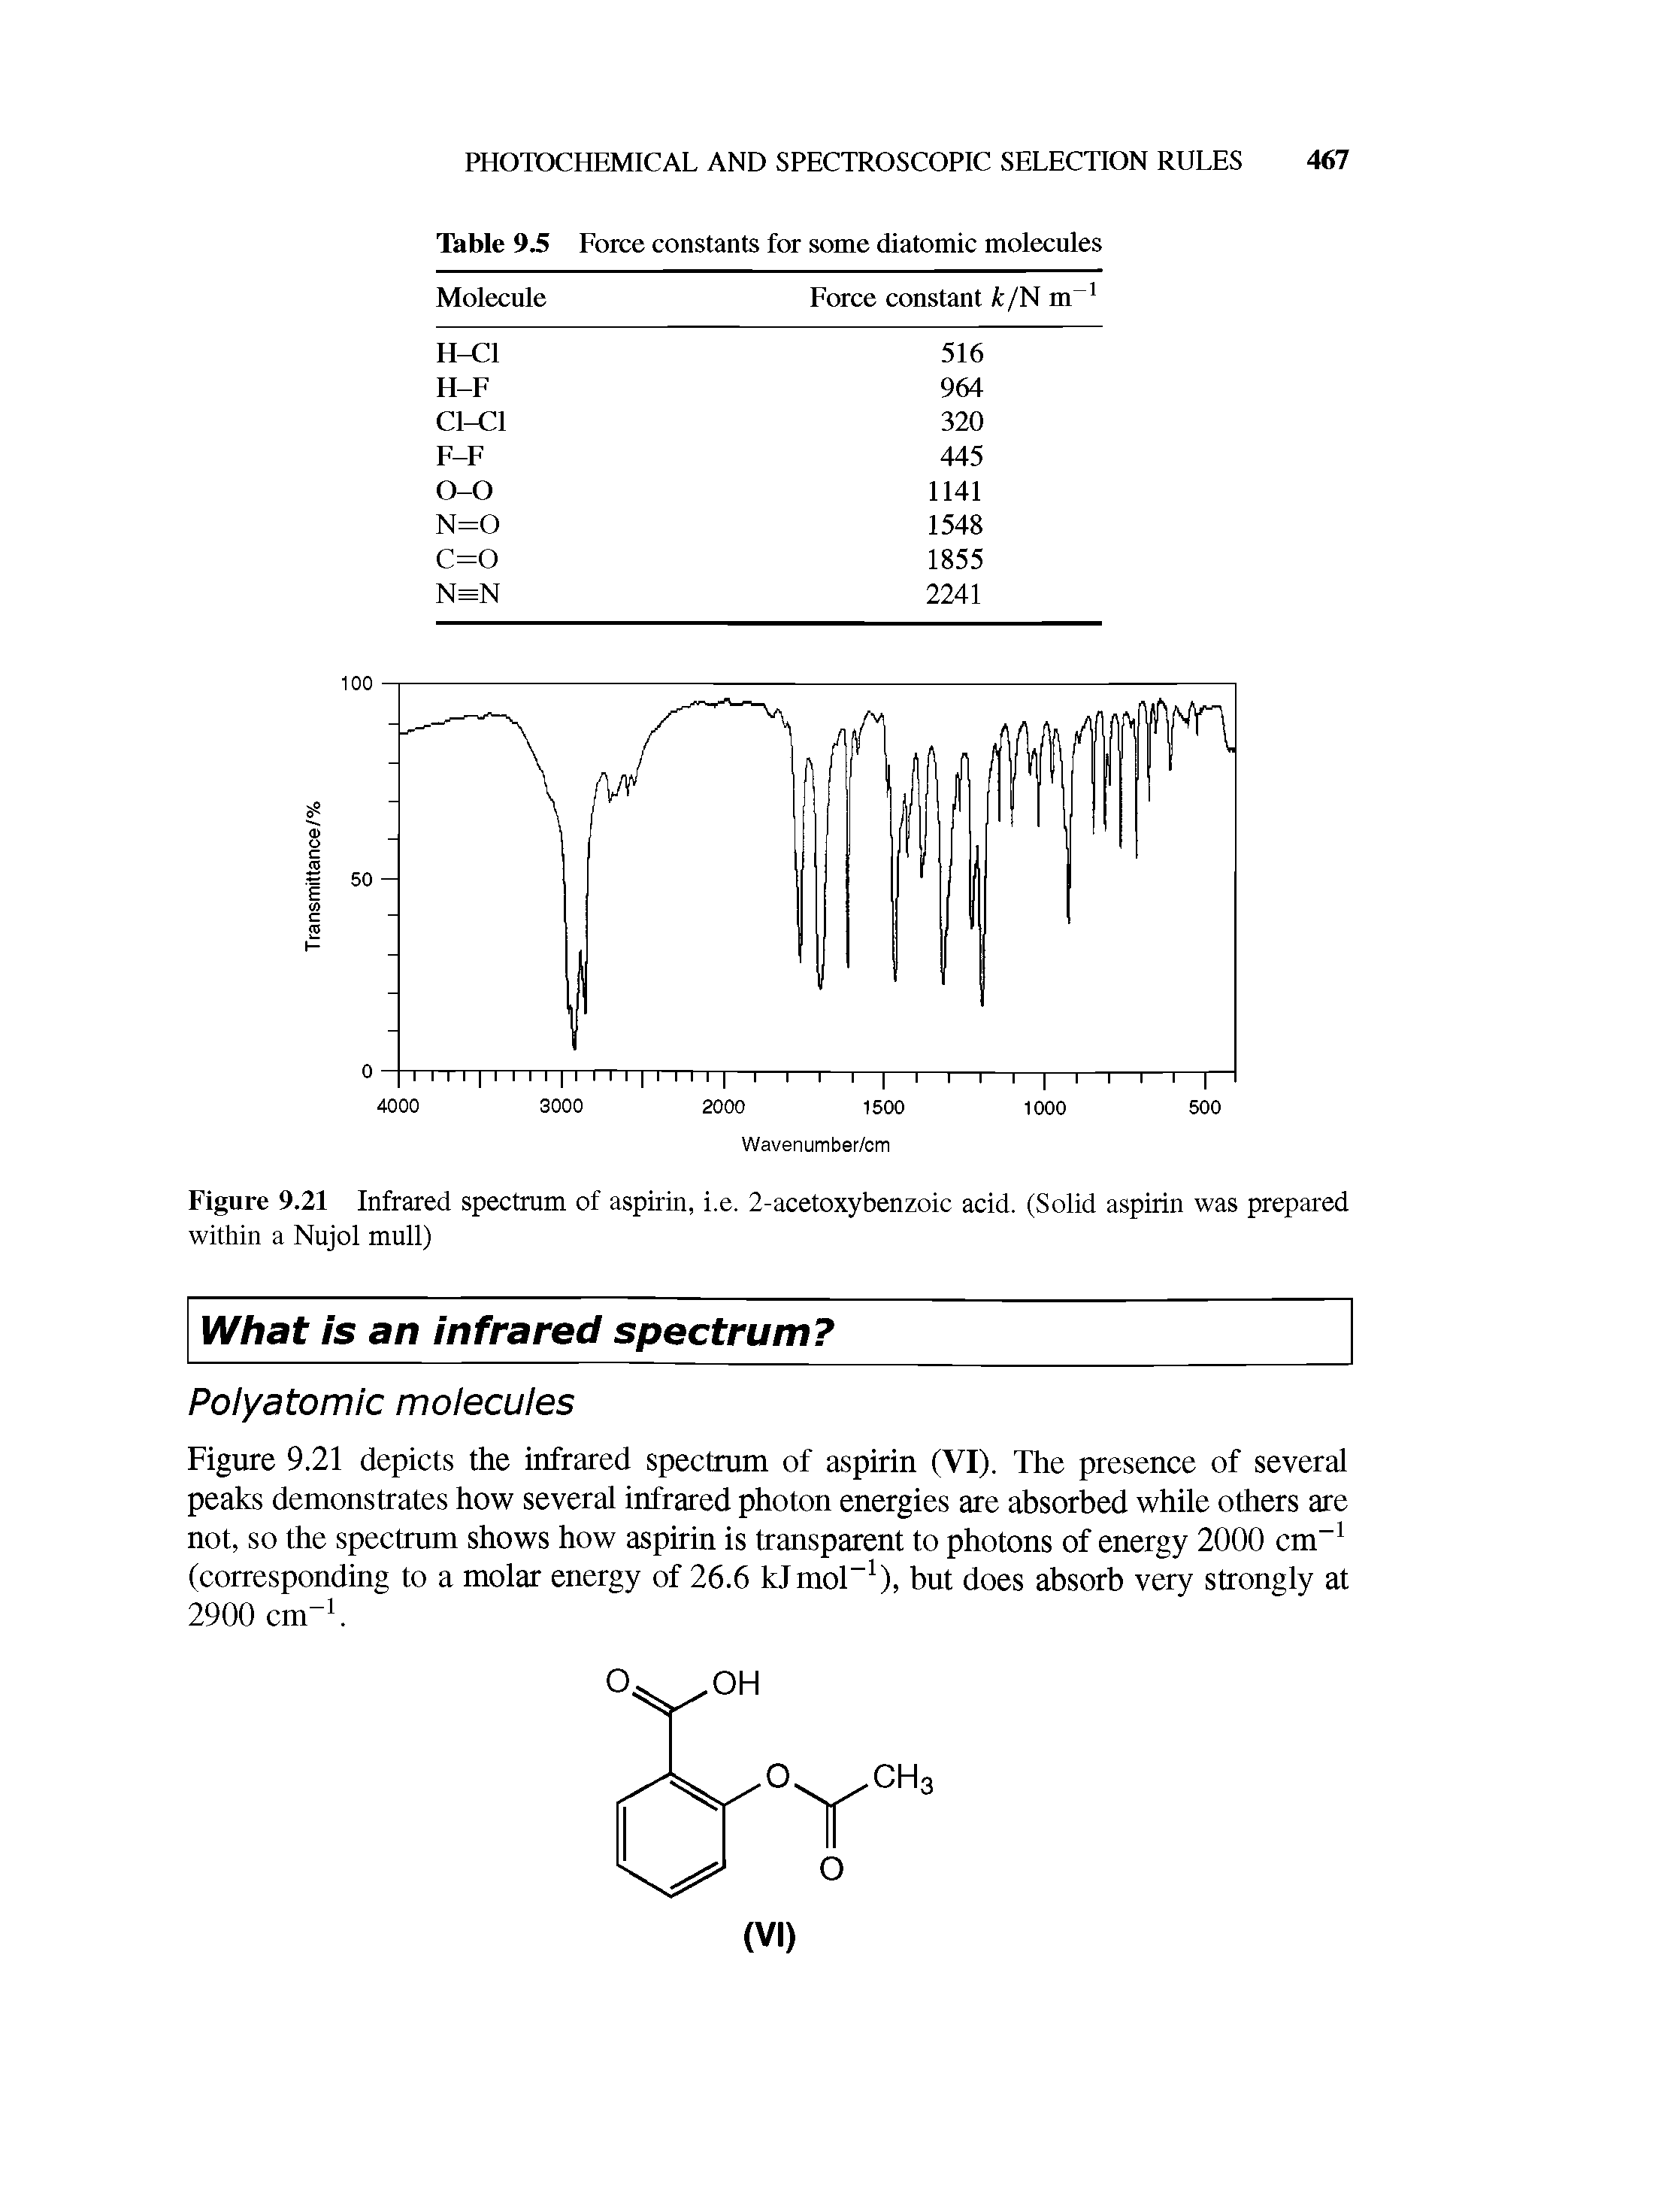 Figure 9.21 Infrared spectrum of aspirin, i.e. 2-acetoxybenzoic acid. (Solid aspirin was prepared within a Nujol mull)...